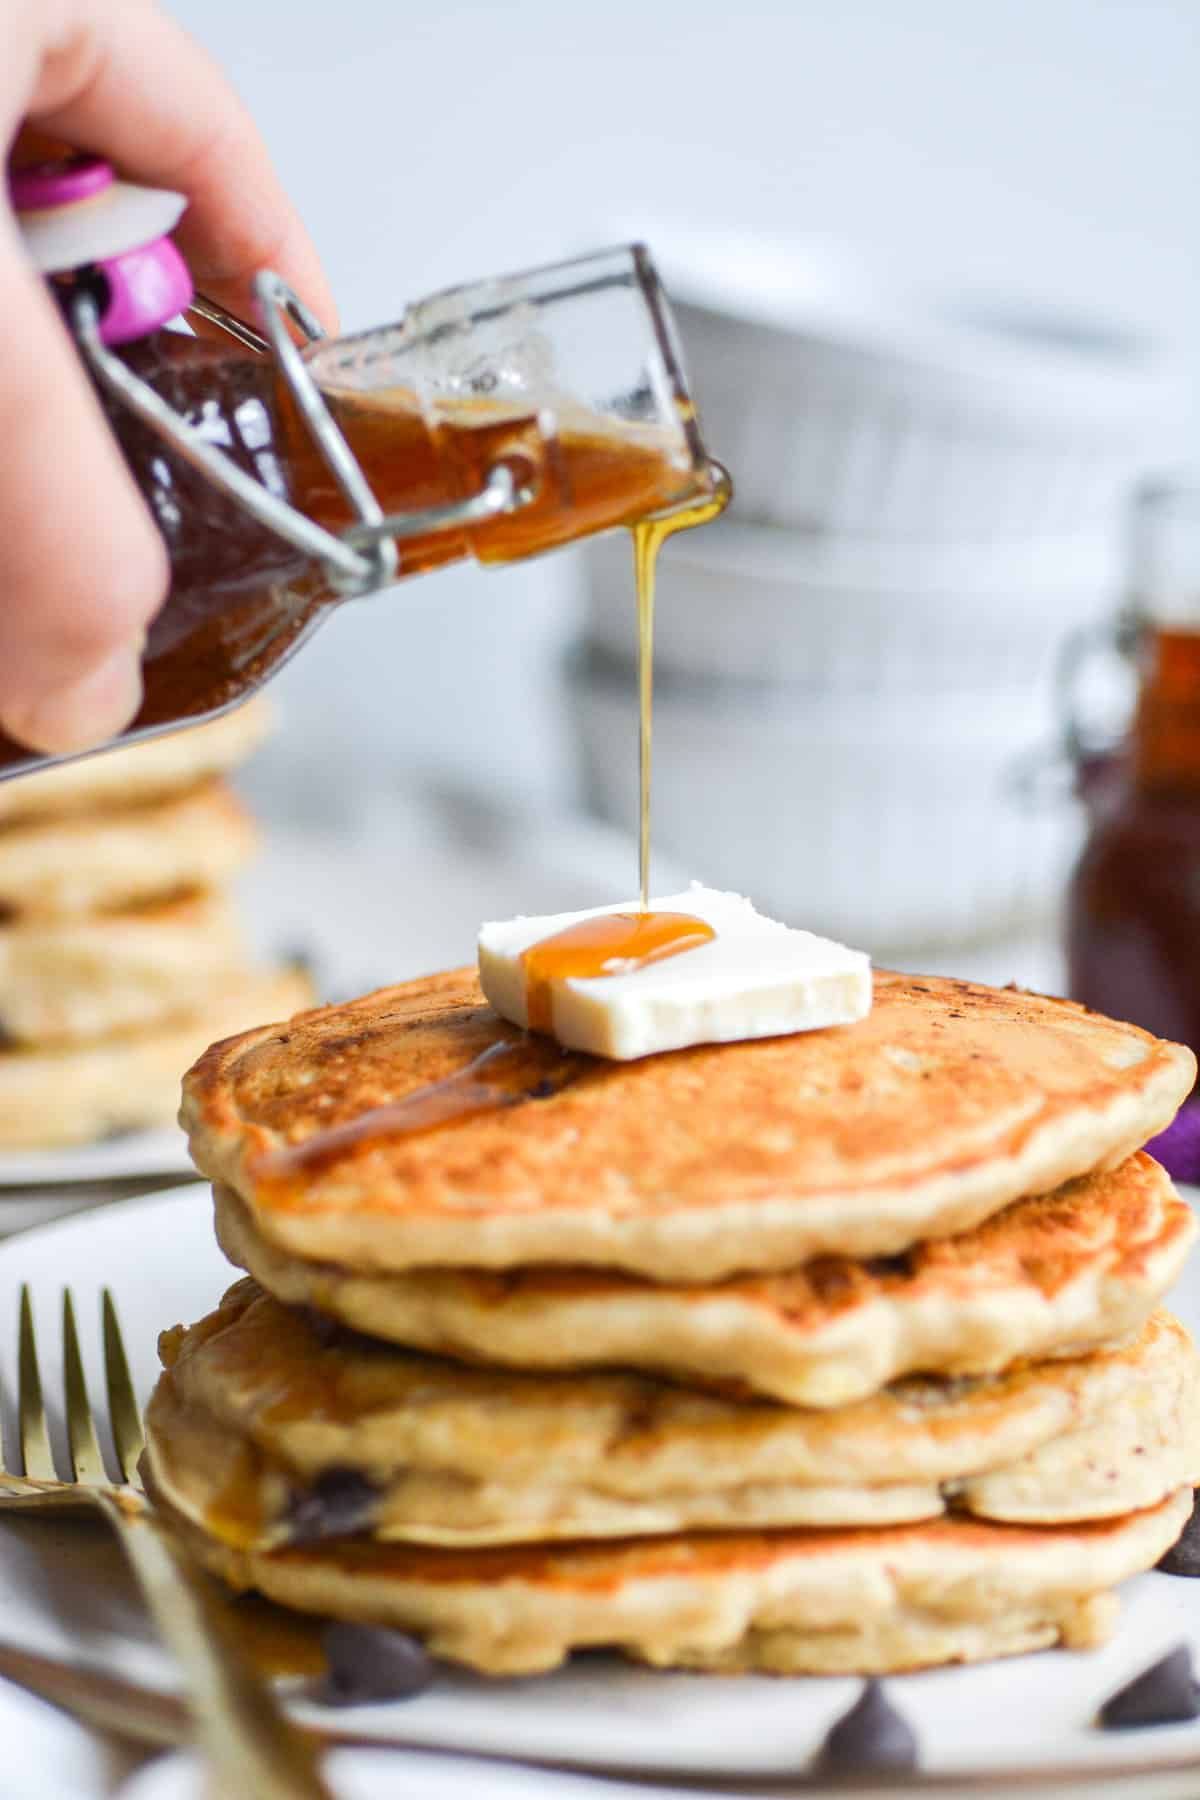 Hand pouring syrup onto a stack of pancakes